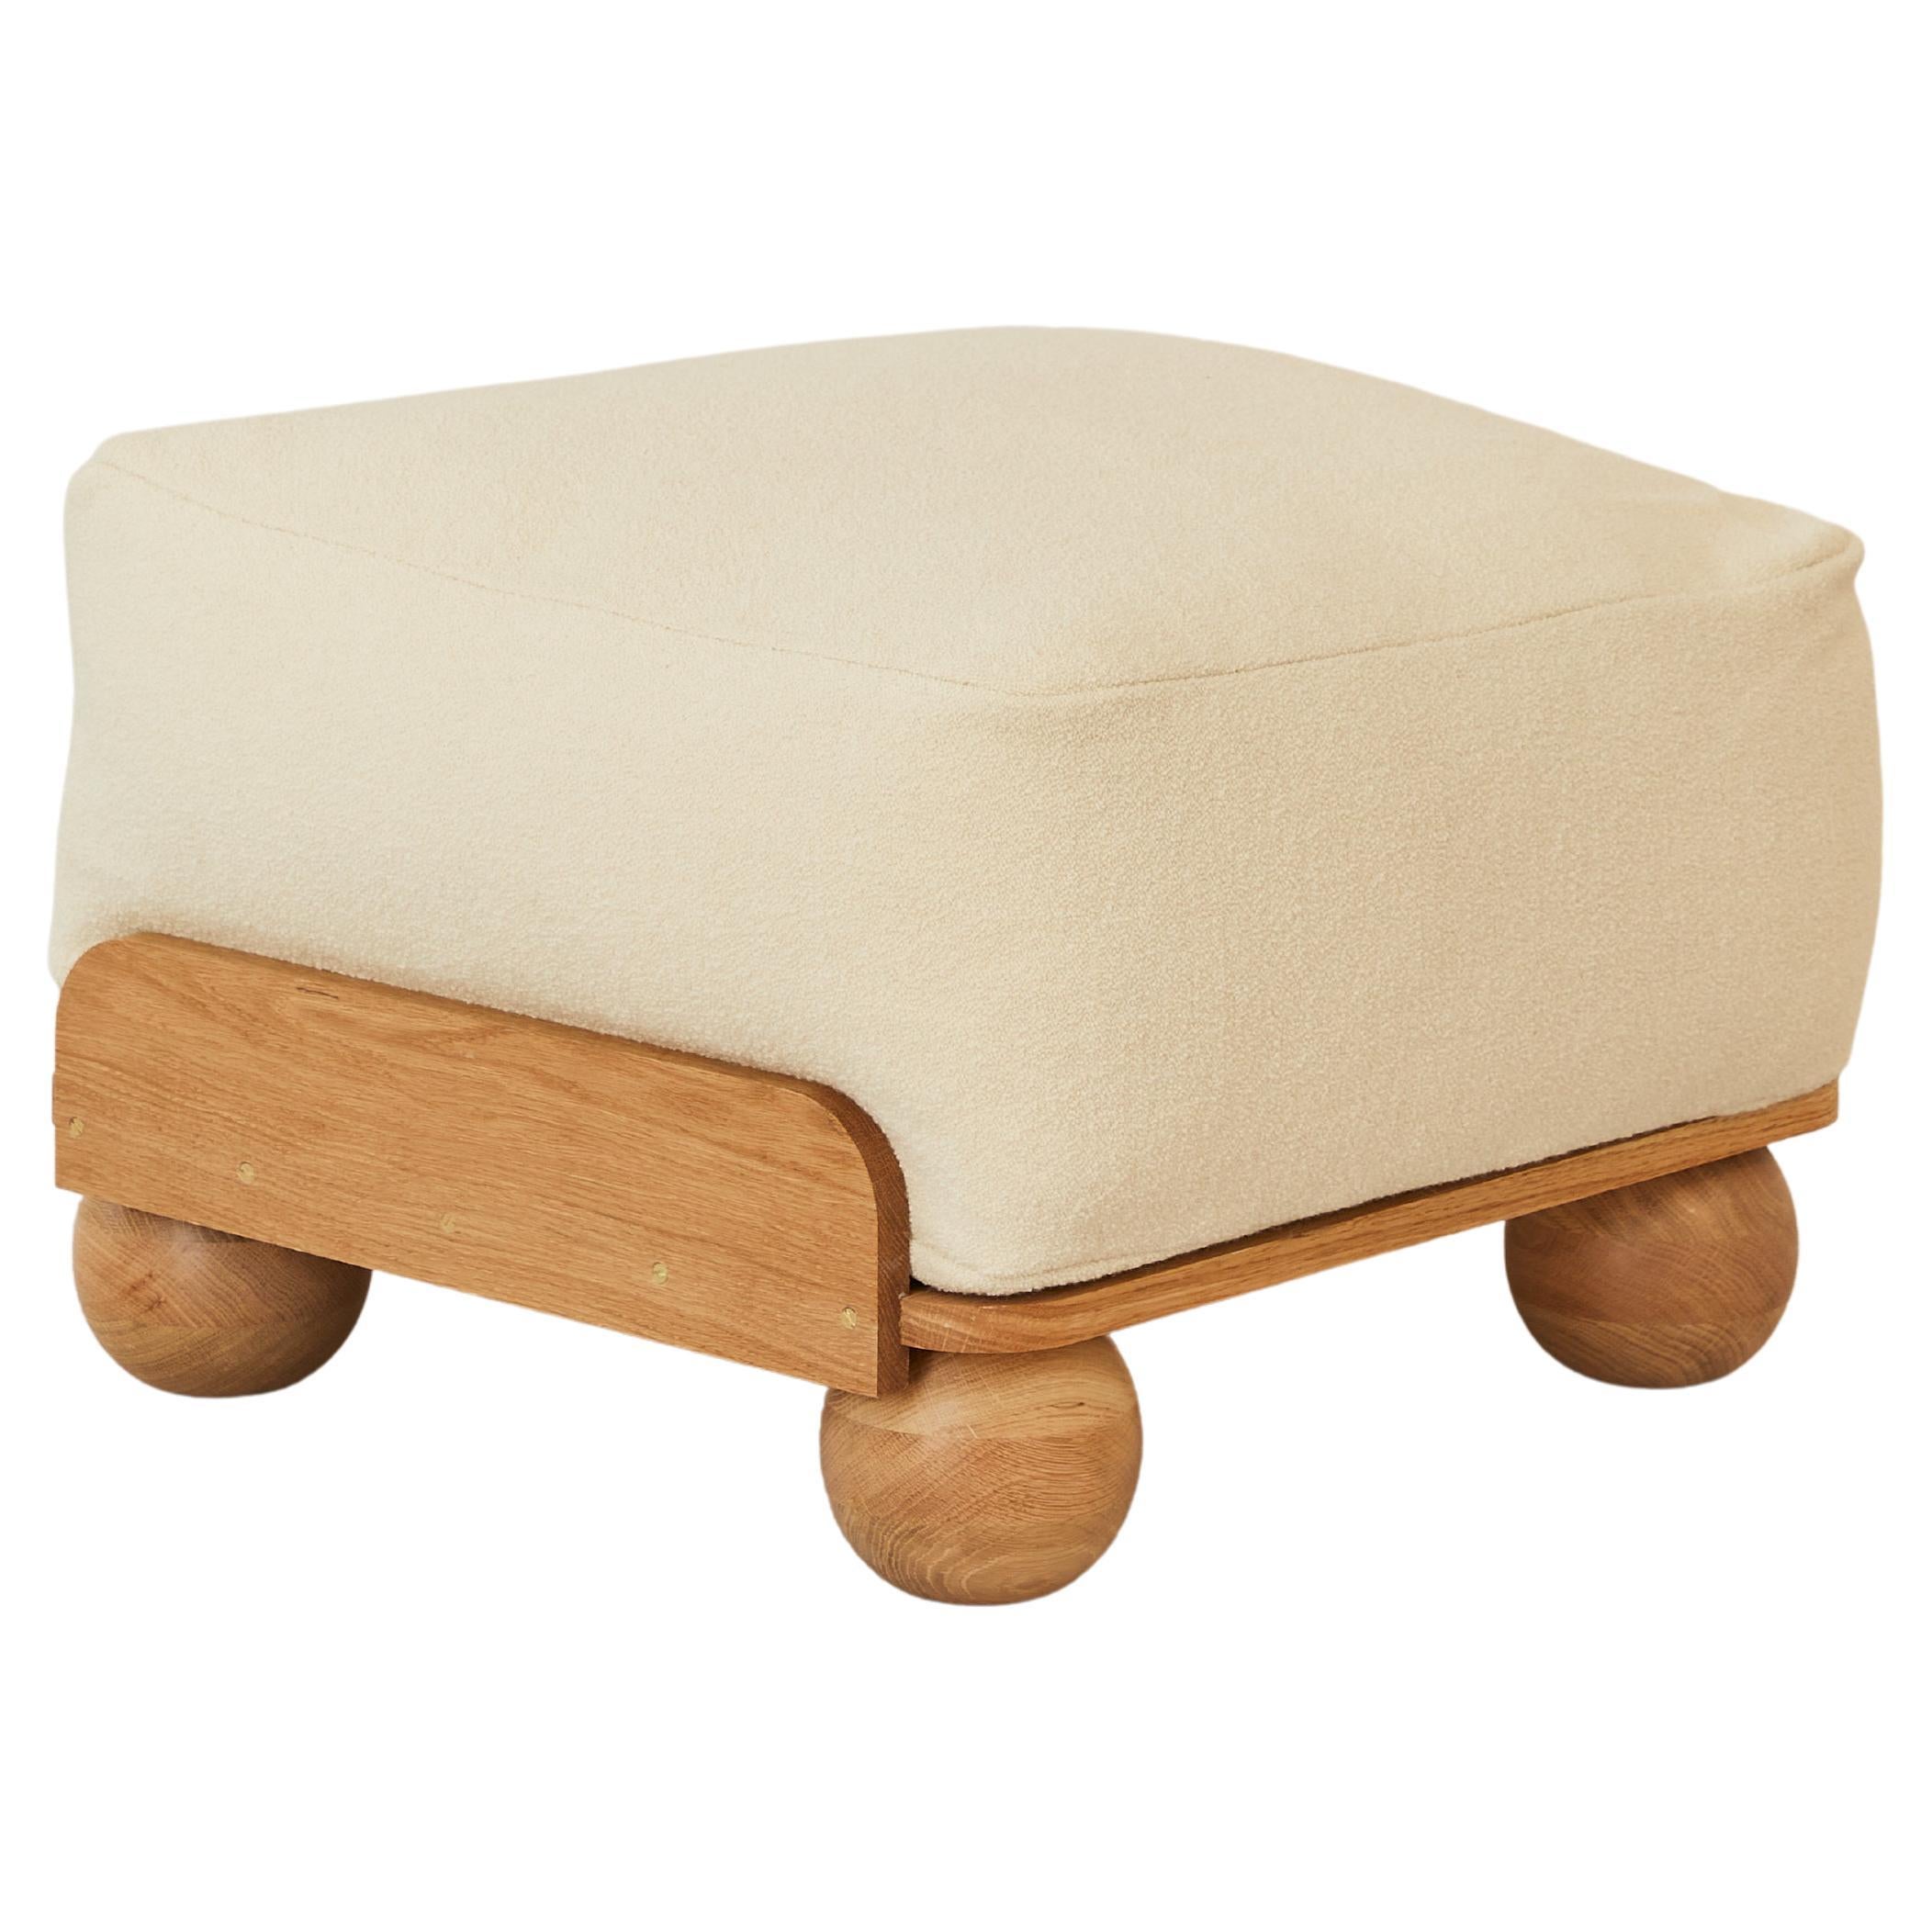 The Cove Footstool is a simple, arm- and backless seat to put your feet up. The Cove Footstool can be combined into a daybed of any length or paired with the Cove Slipper or Armchair to make a chaise.

Like its Cove siblings, the Footstool reveals